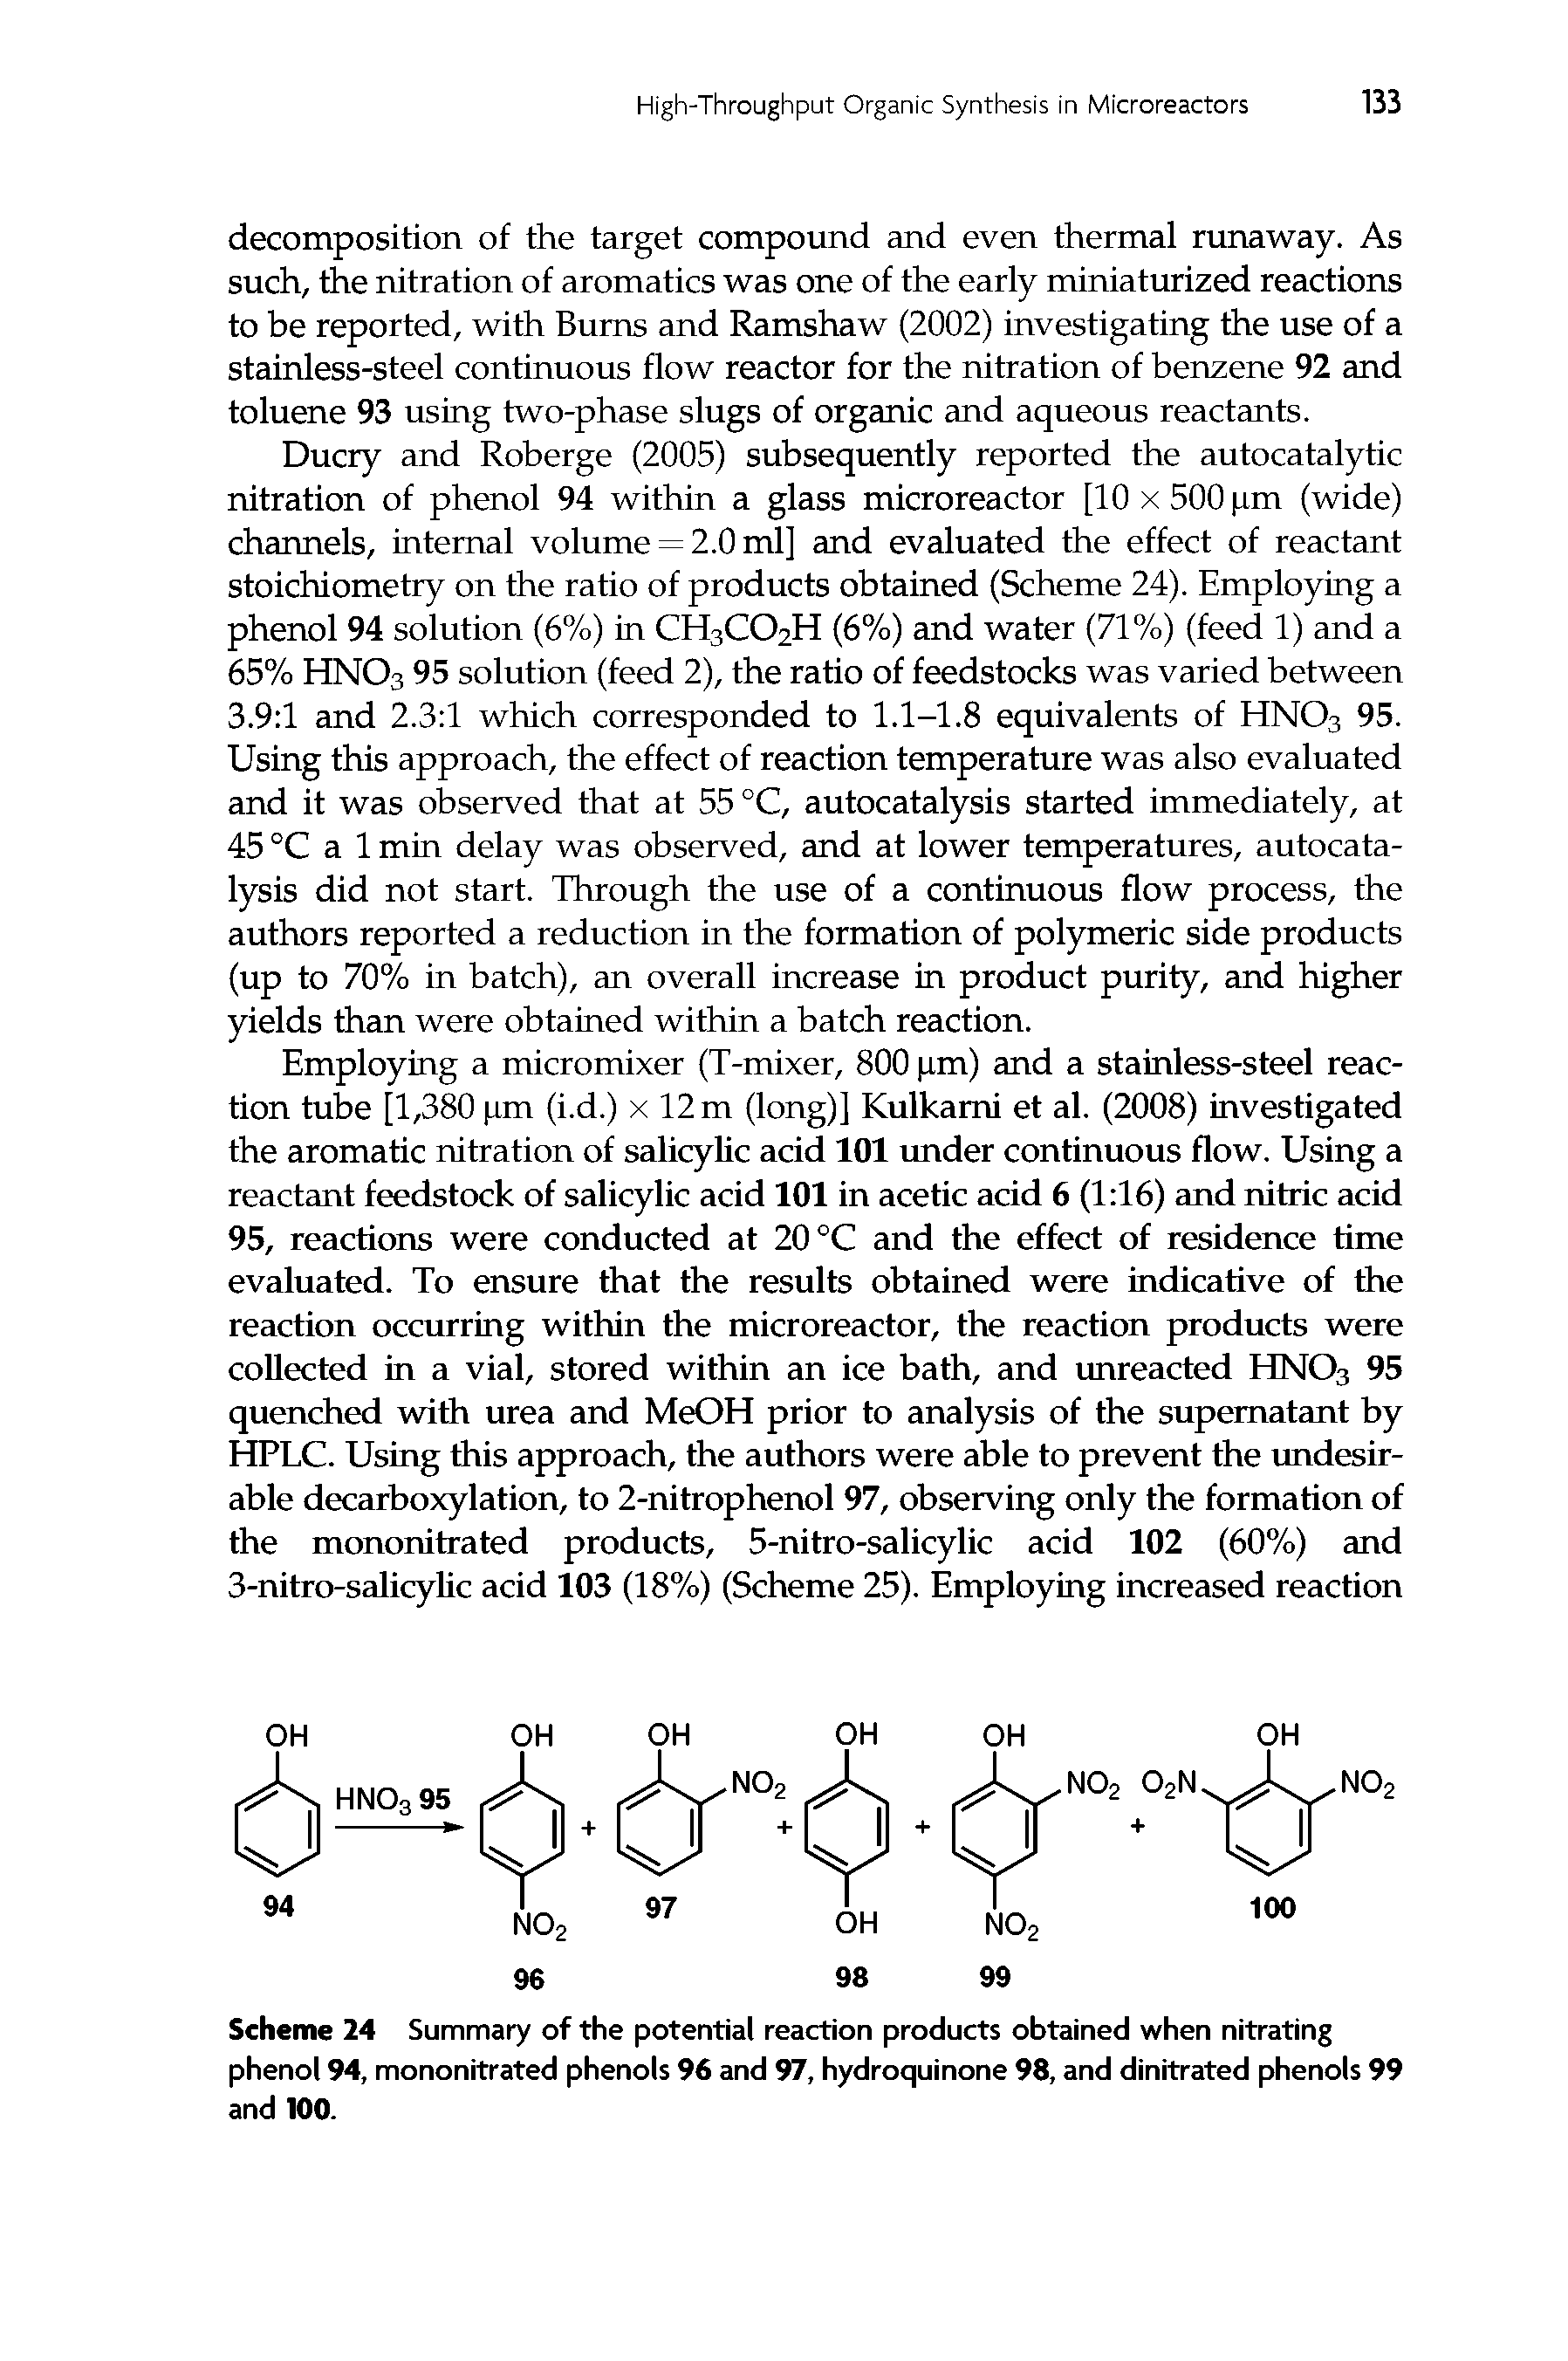 Scheme 24 Summary of the potential reaction products obtained when nitrating phenol 94, mononitrated phenols 96 and 97, hydroquinone 98, and dinitrated phenols 99 and 100.